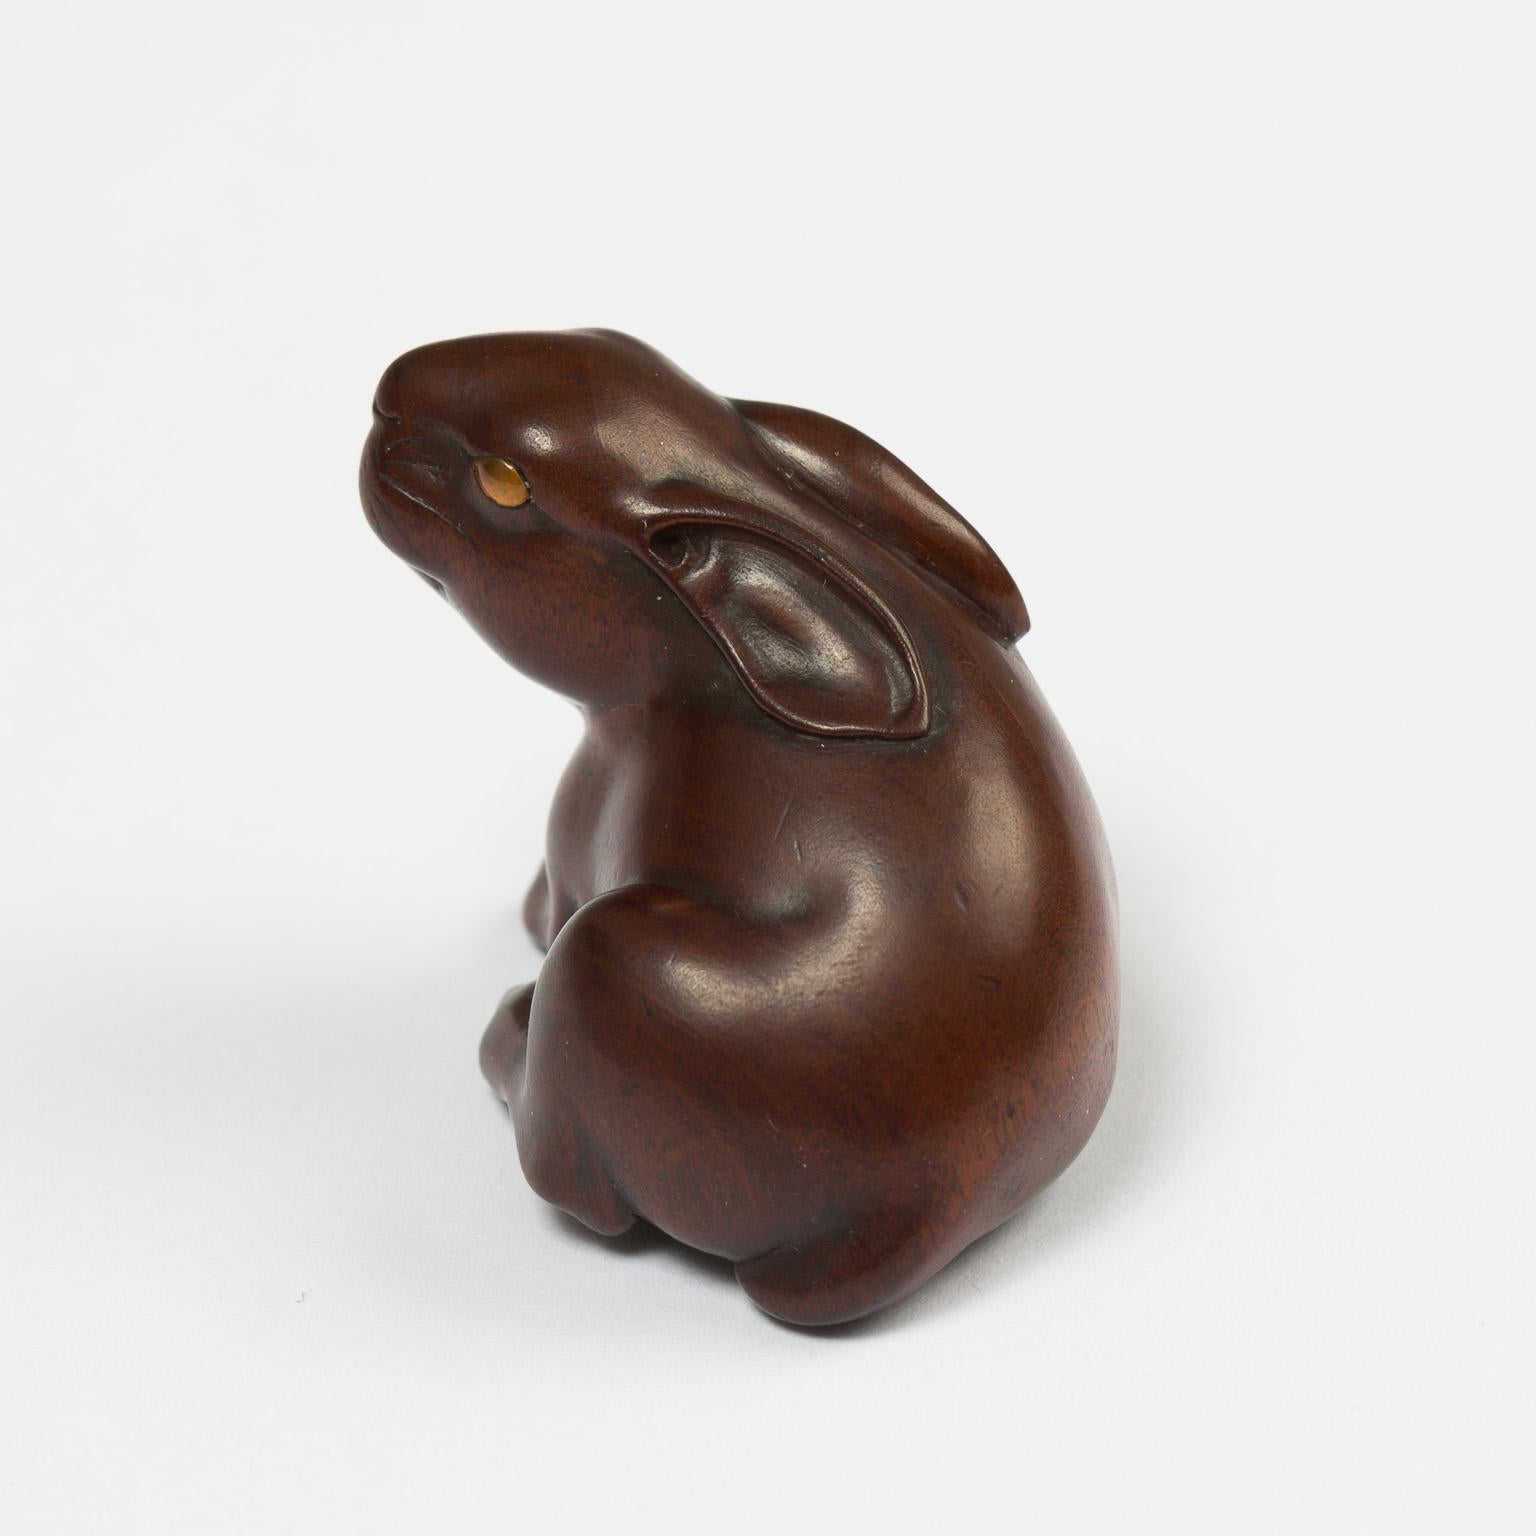 The hare is shown seated, its head raised and turned to the left, its forelegs outstretched and one hind leg forming the himotoshi.
Ever present in Japanese folklore, and one of the twelve animals of the zodiac cycle, hares are a common theme for